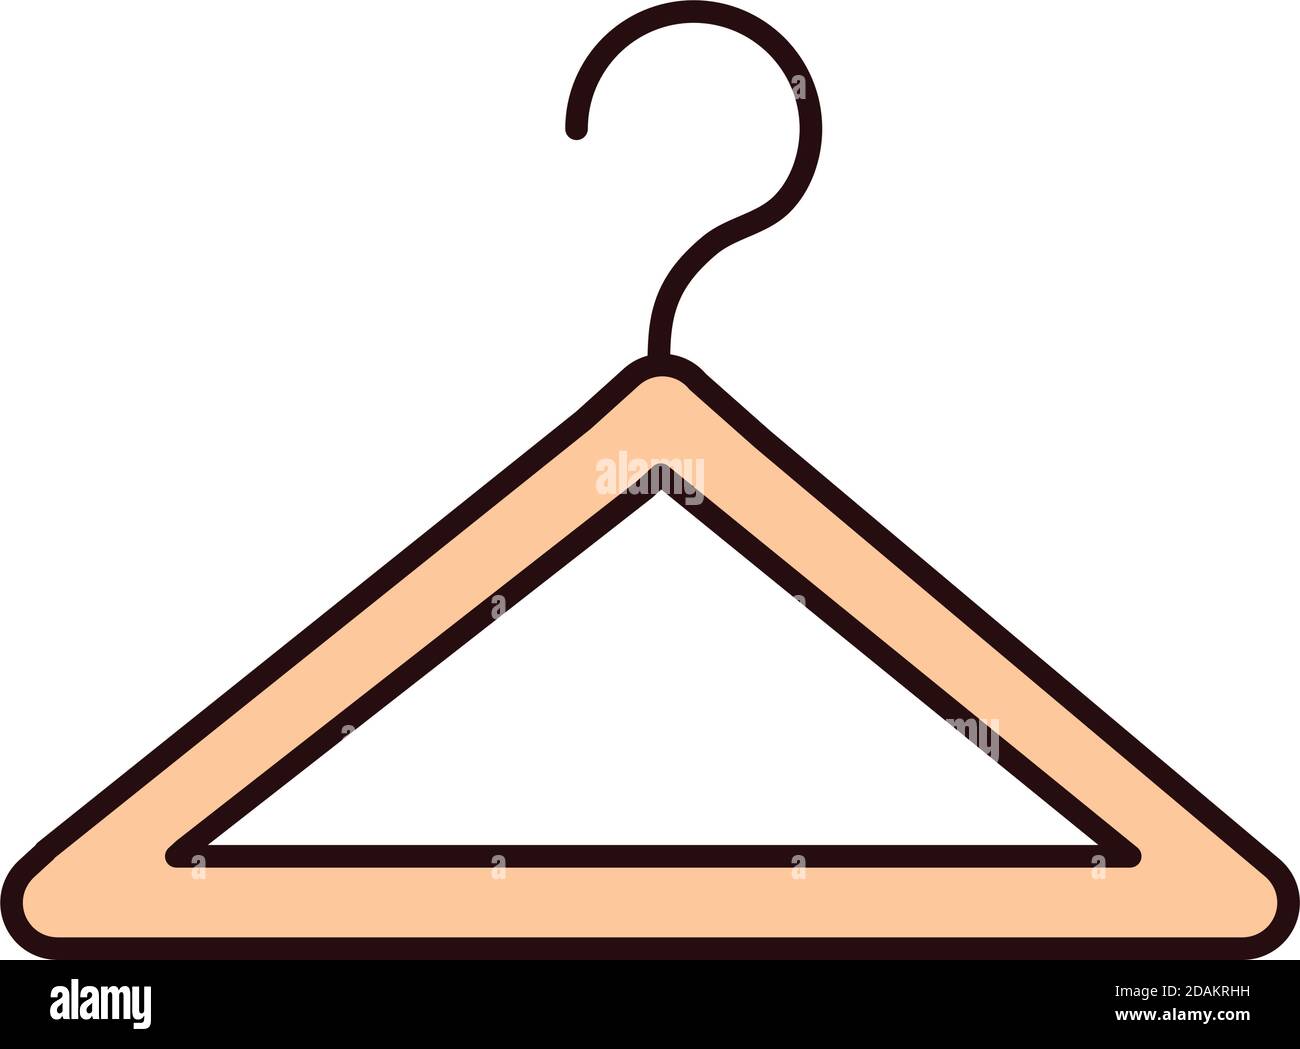 https://c8.alamy.com/comp/2DAKRHH/hanger-accessory-clothing-vector-illustration-line-and-fill-icon-2DAKRHH.jpg